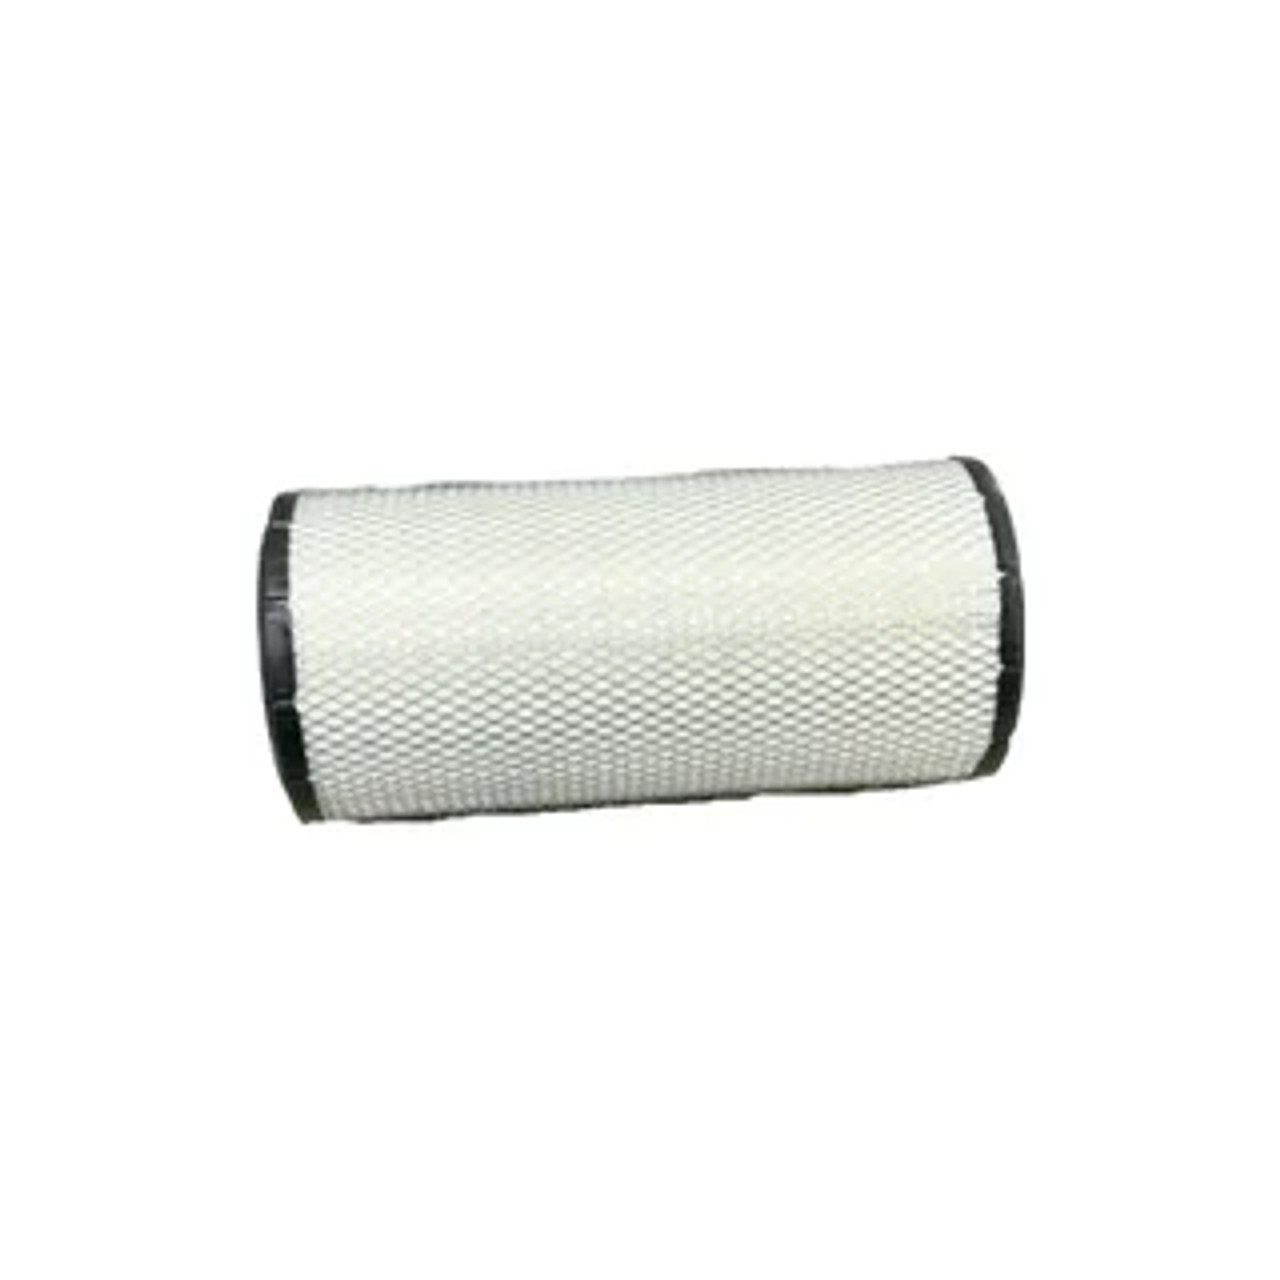 900-6981-95: Filter, Air Primary For Jd Engine